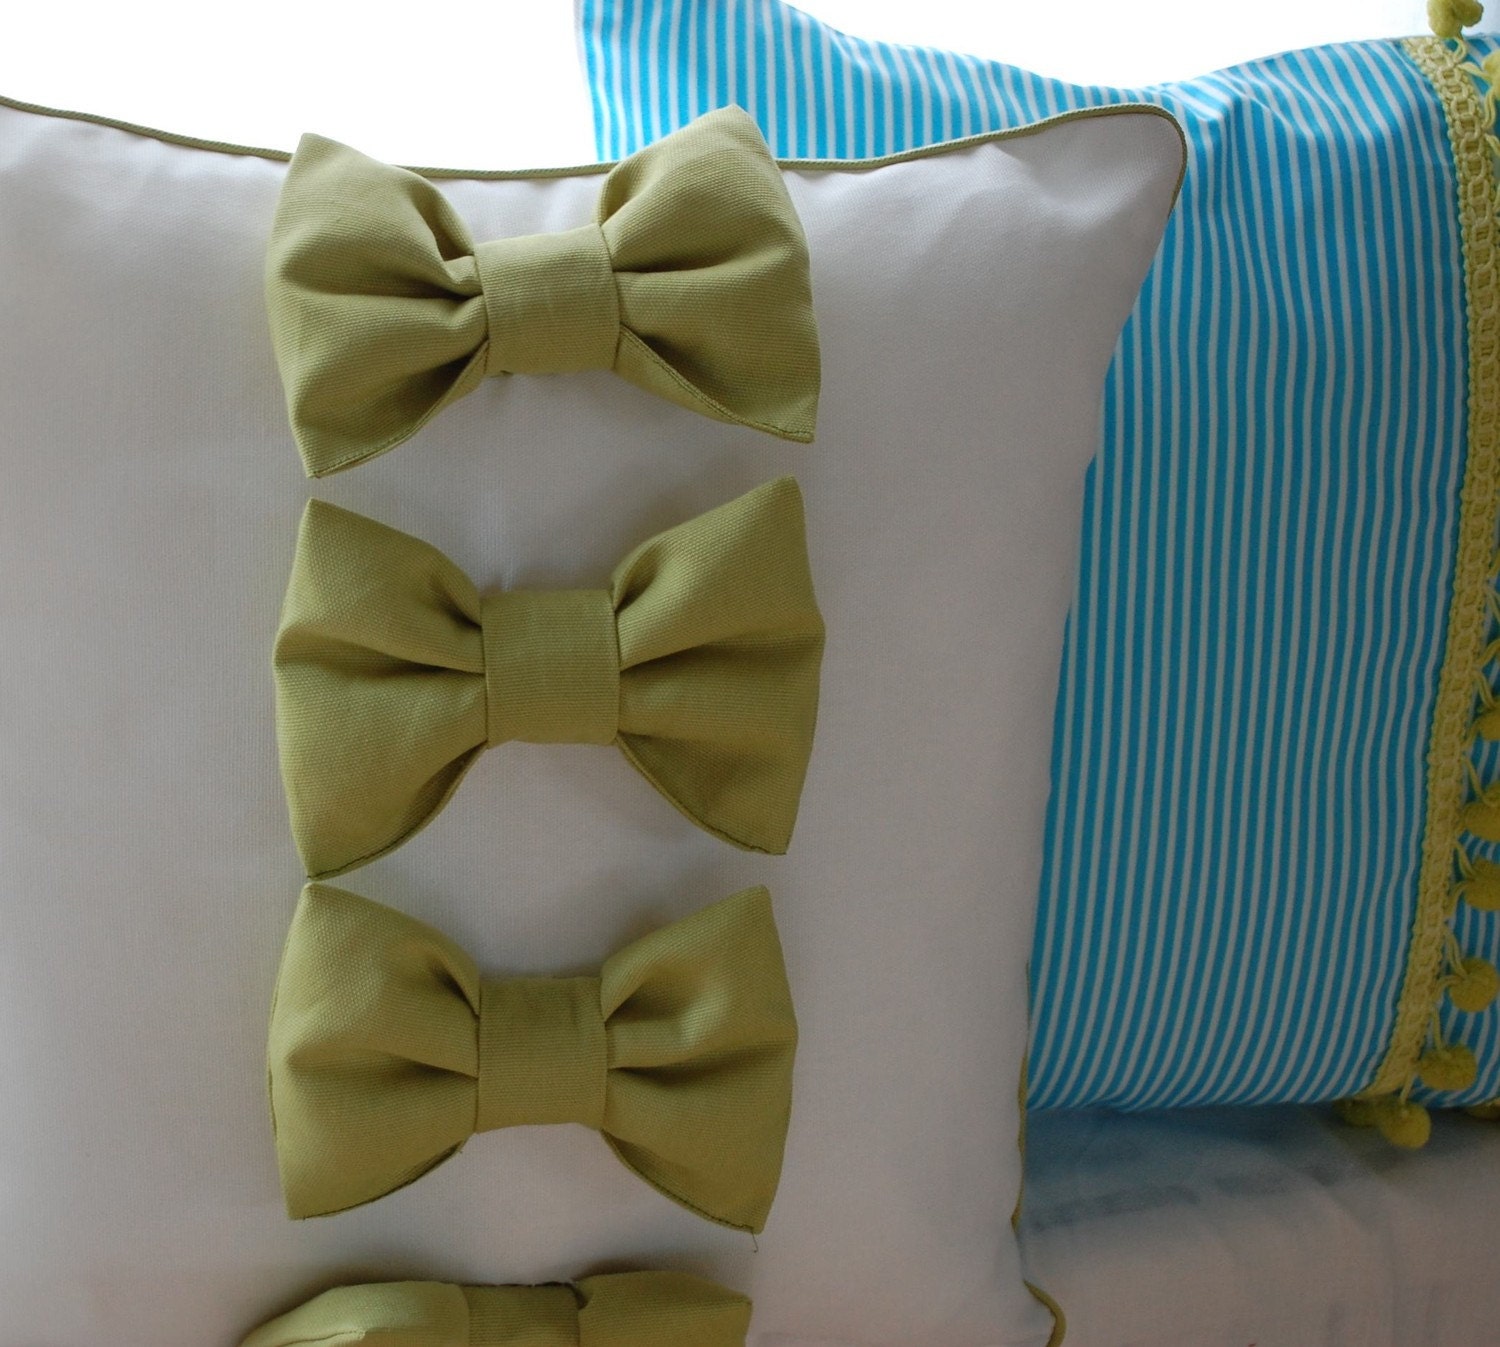 Lots of Bows Pillow cover